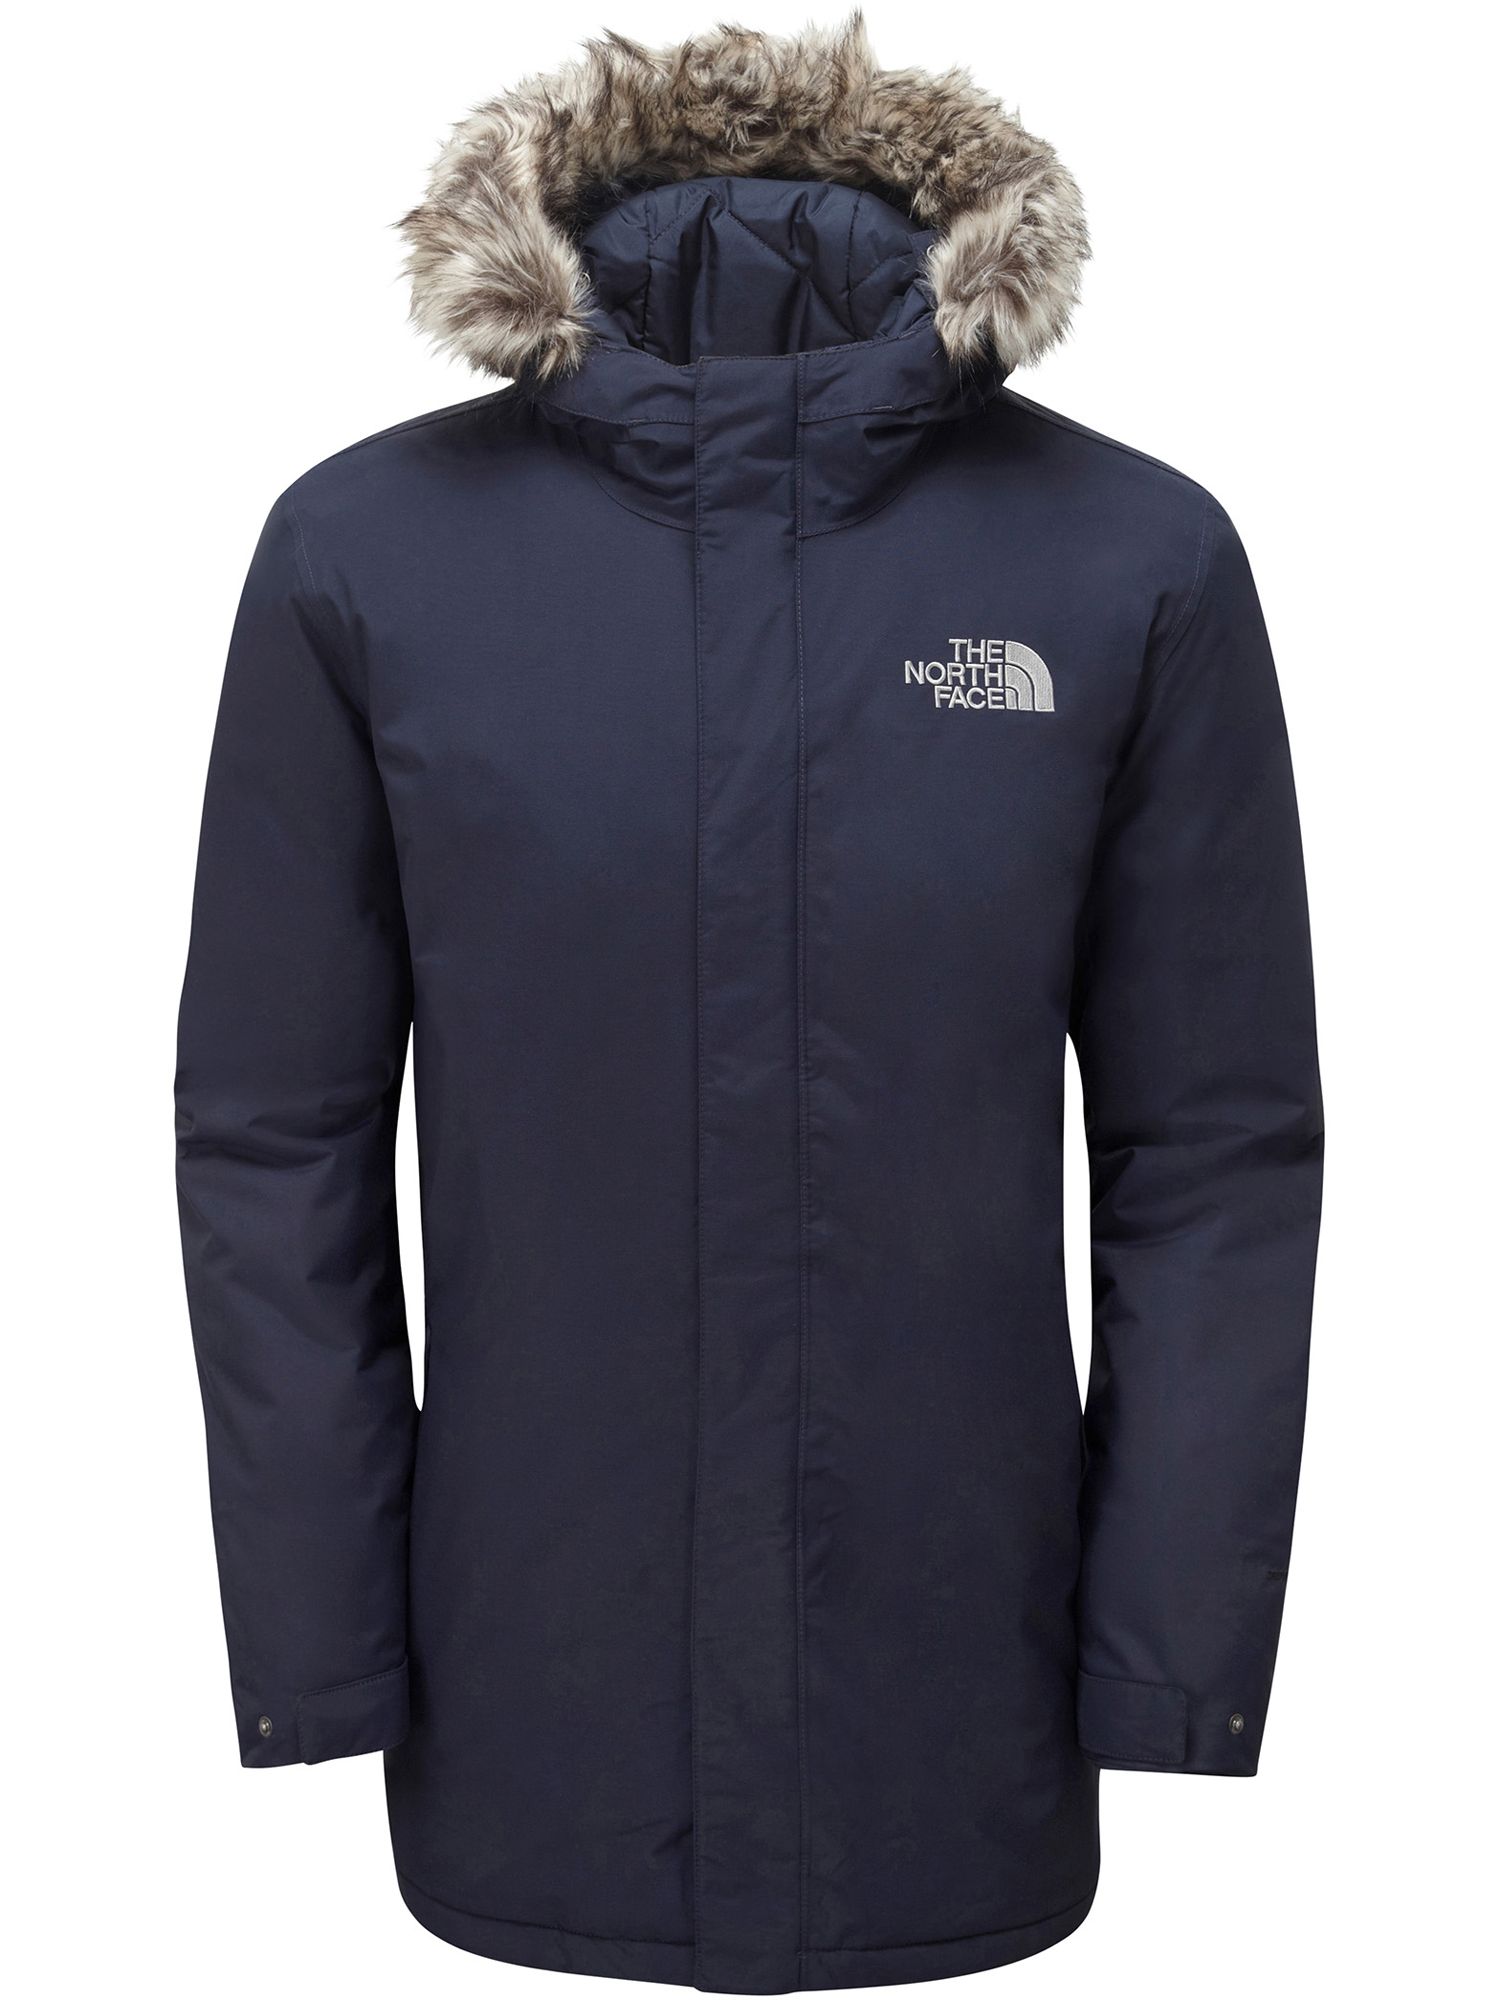 the north face zaneck jacket in black